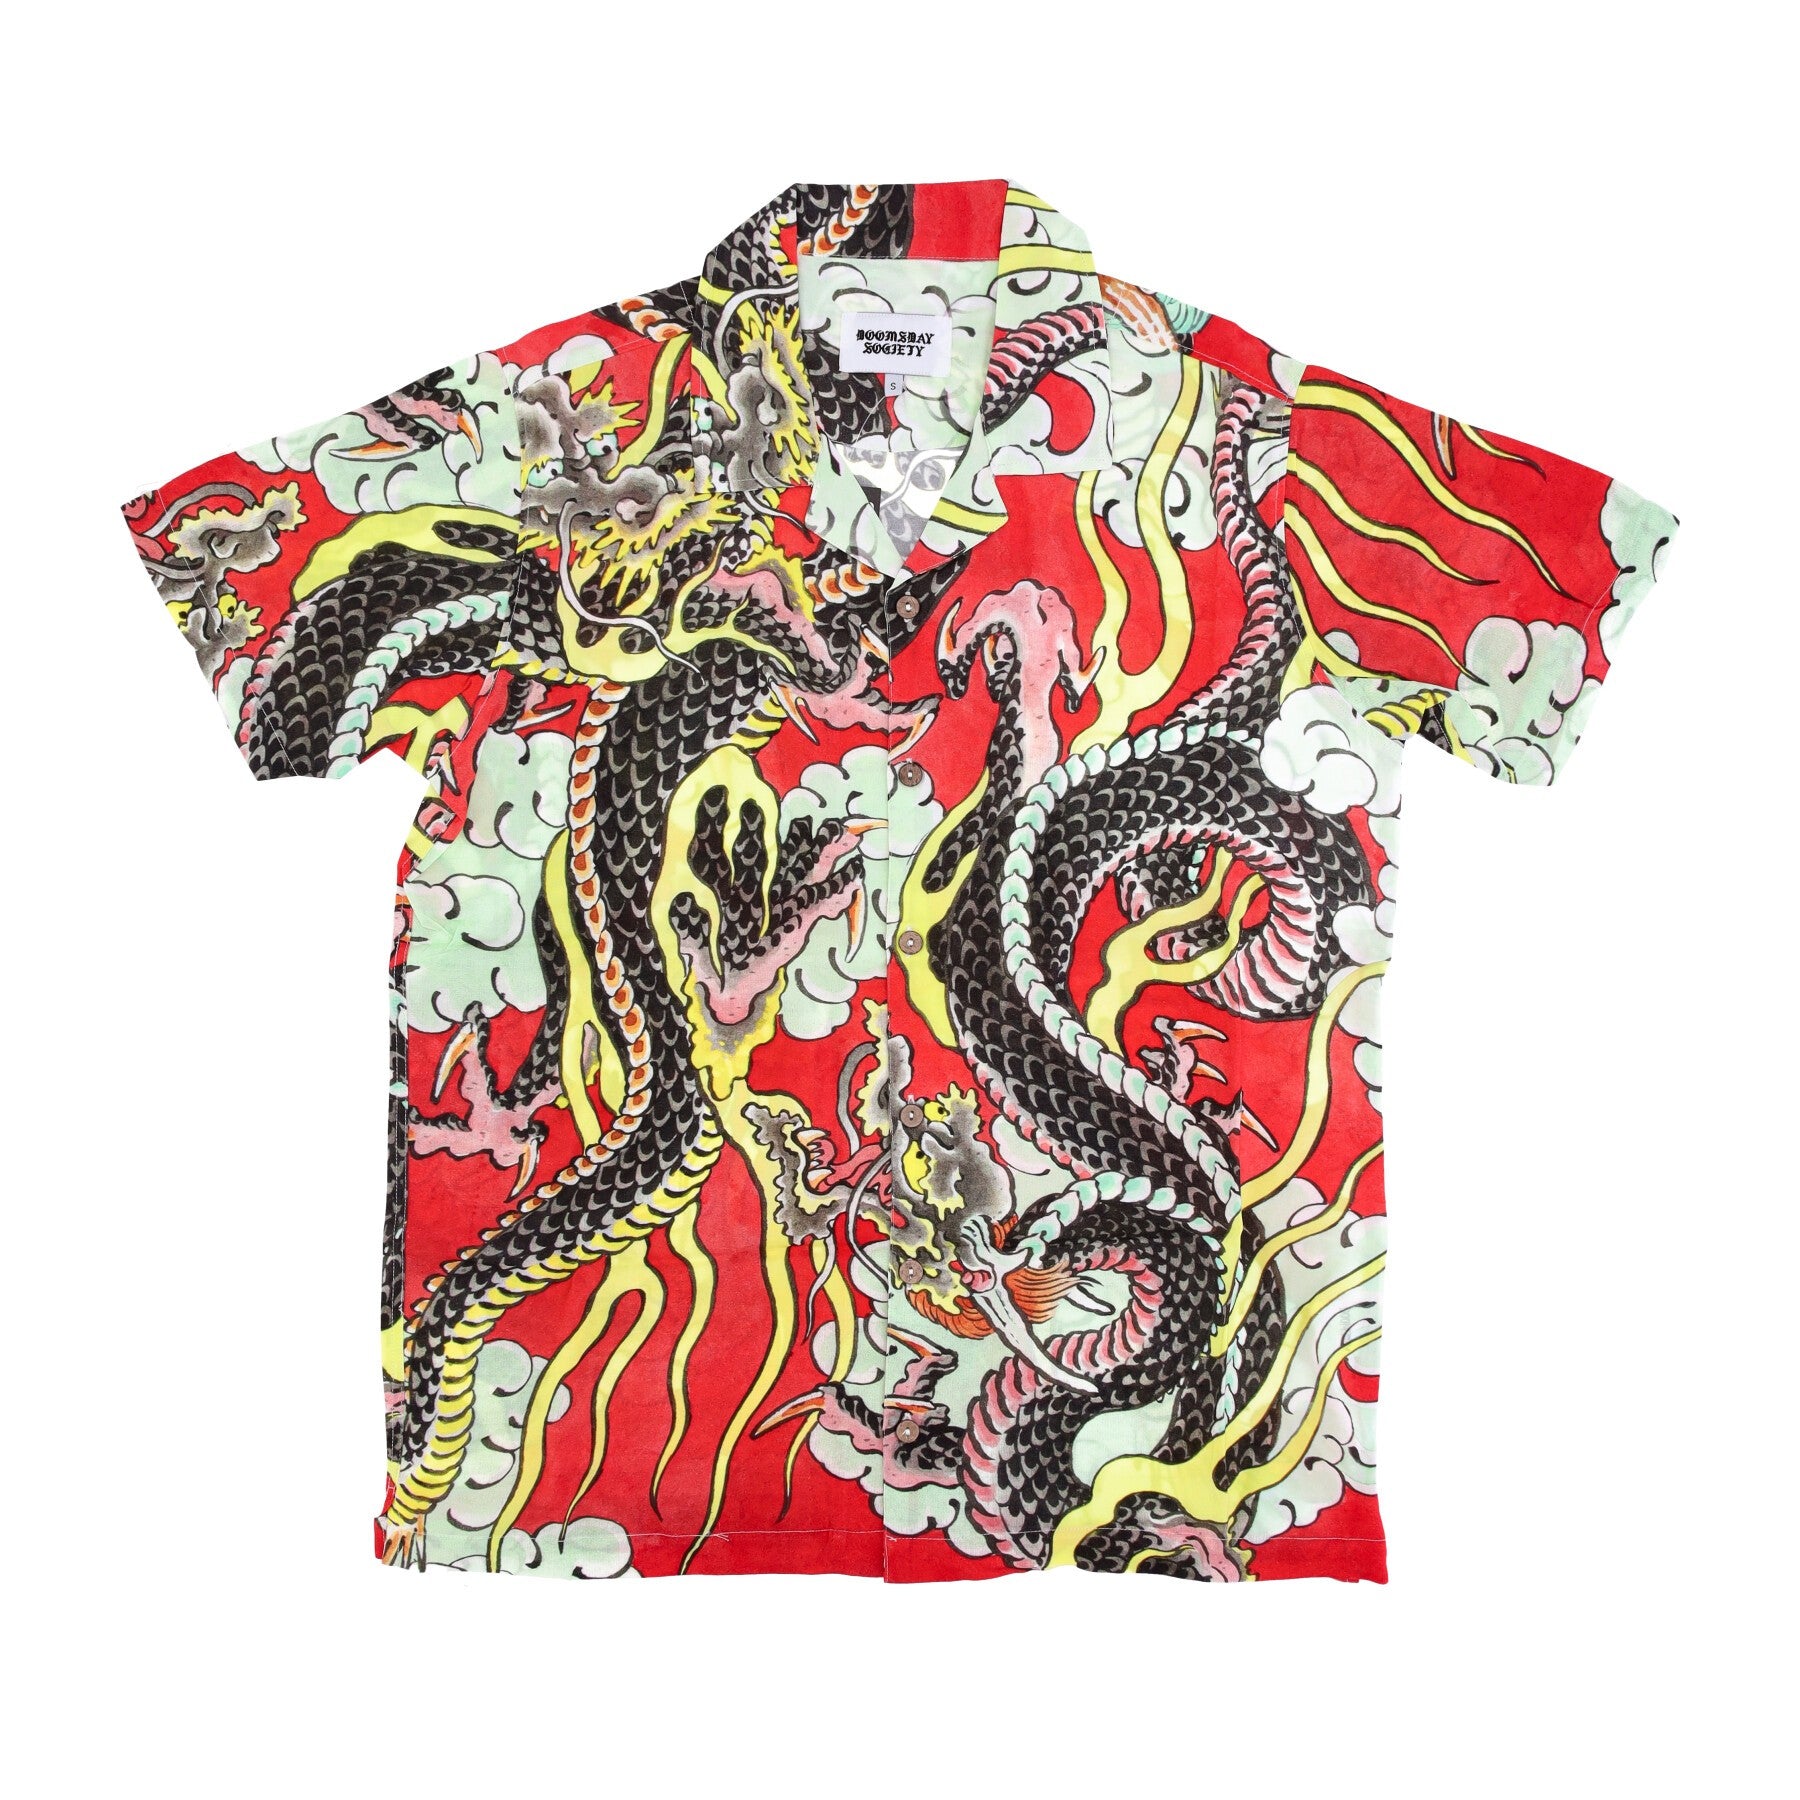 Doomsday, Camicia Manica Corta Uomo Dungeon Shirt, Red All Over Print